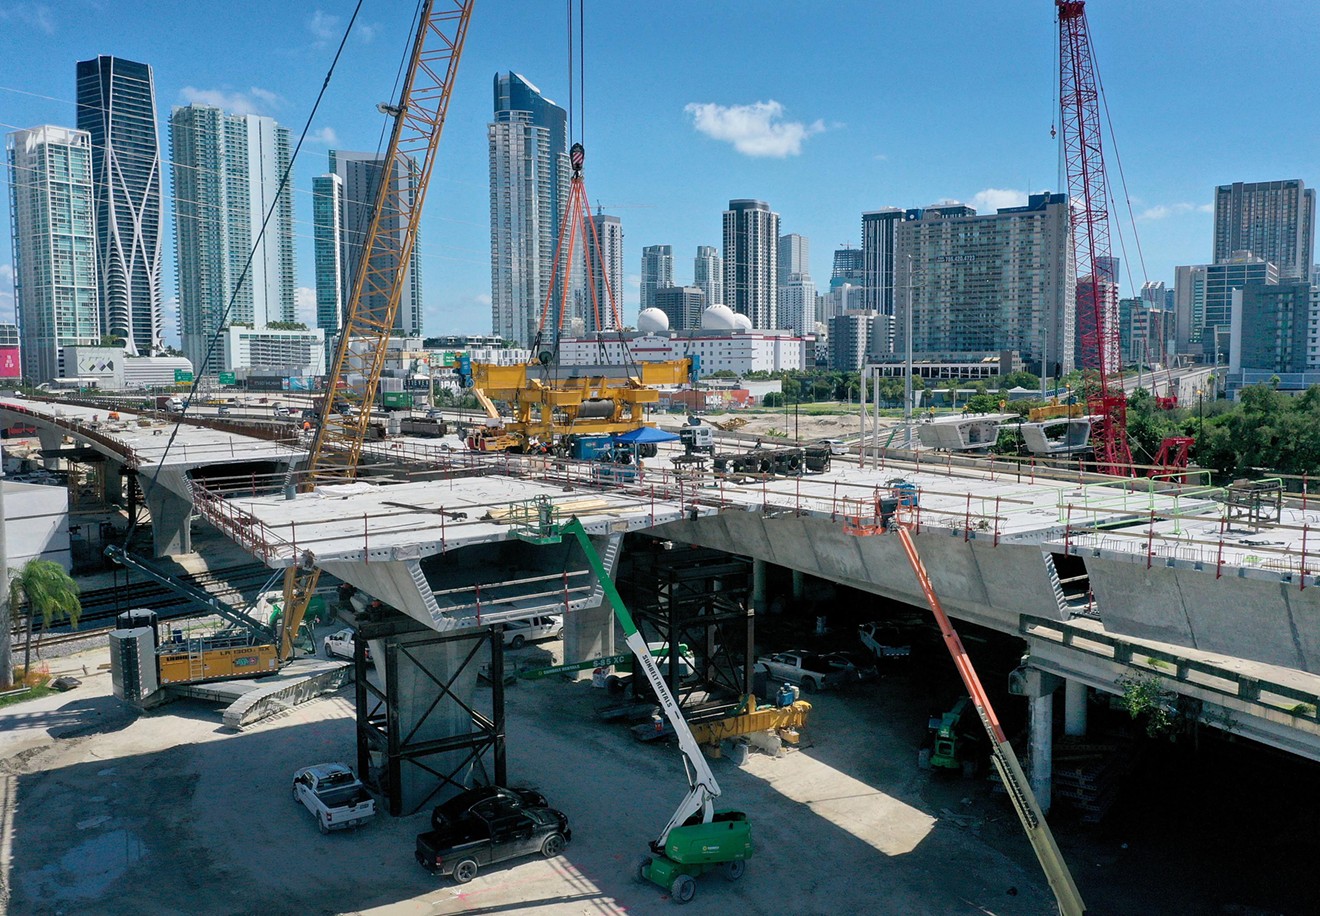 Construction underway on a Miami highway redesign project on September 27, 2021 in Miami